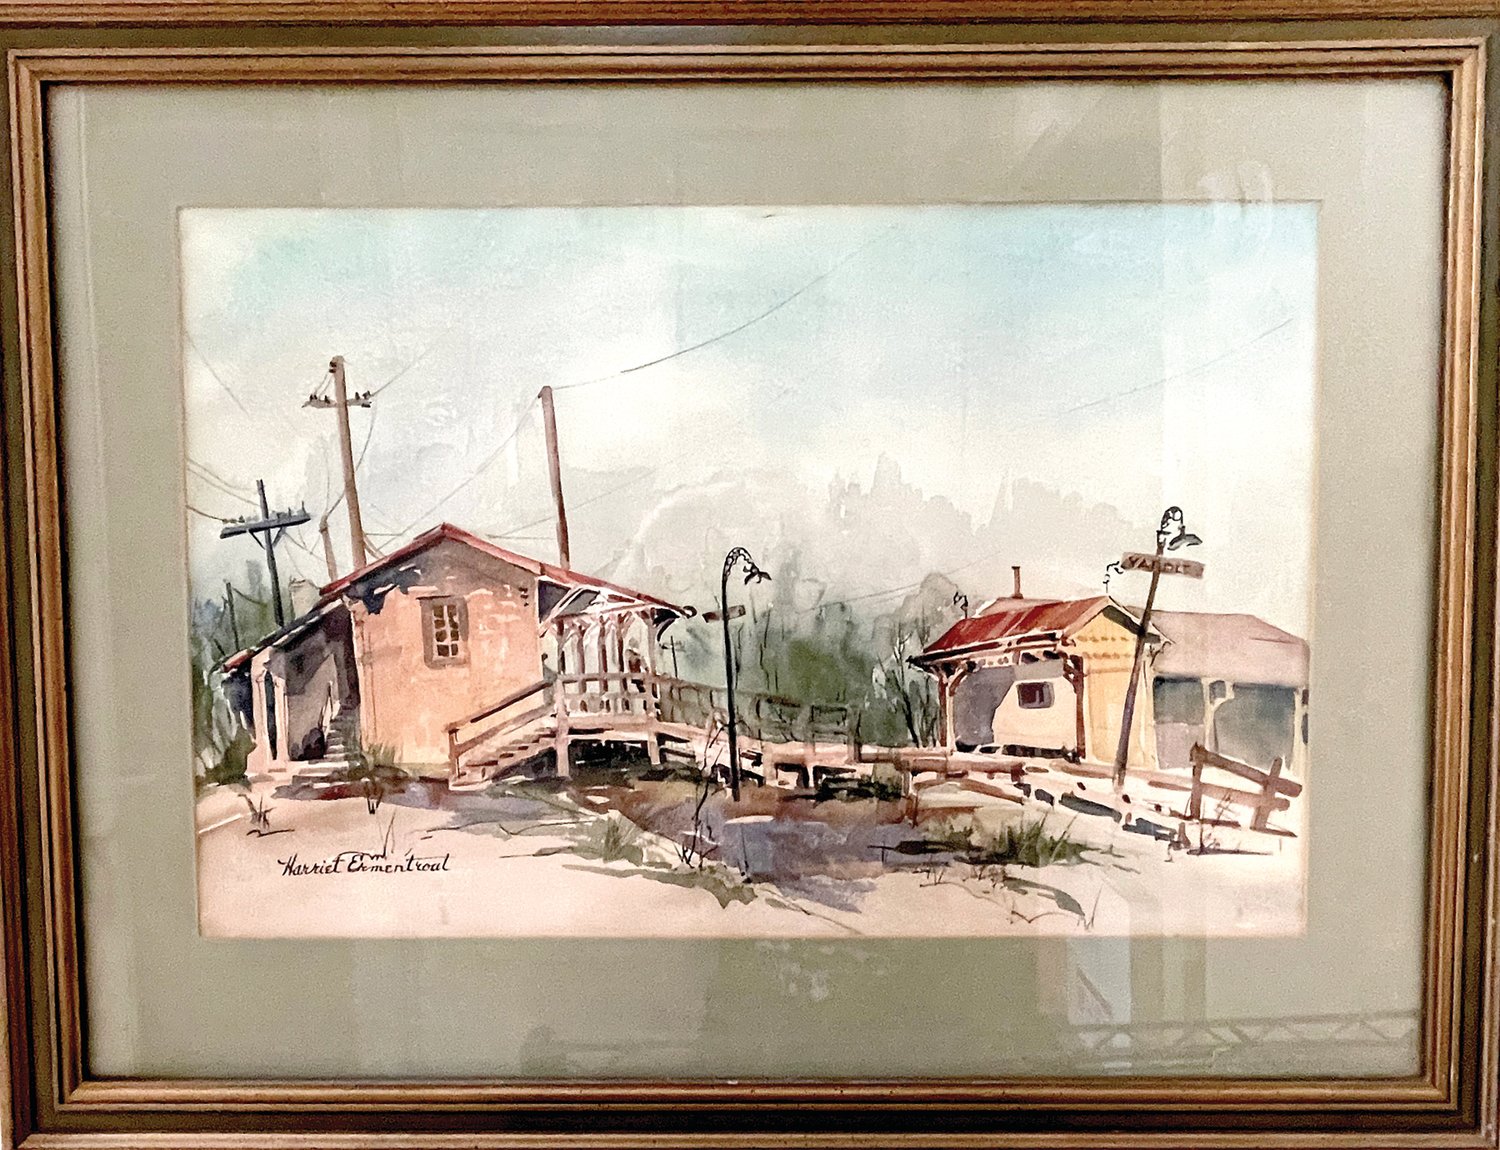 “Yardley Train Station” is a watercolor by Harriet Ermentrout.